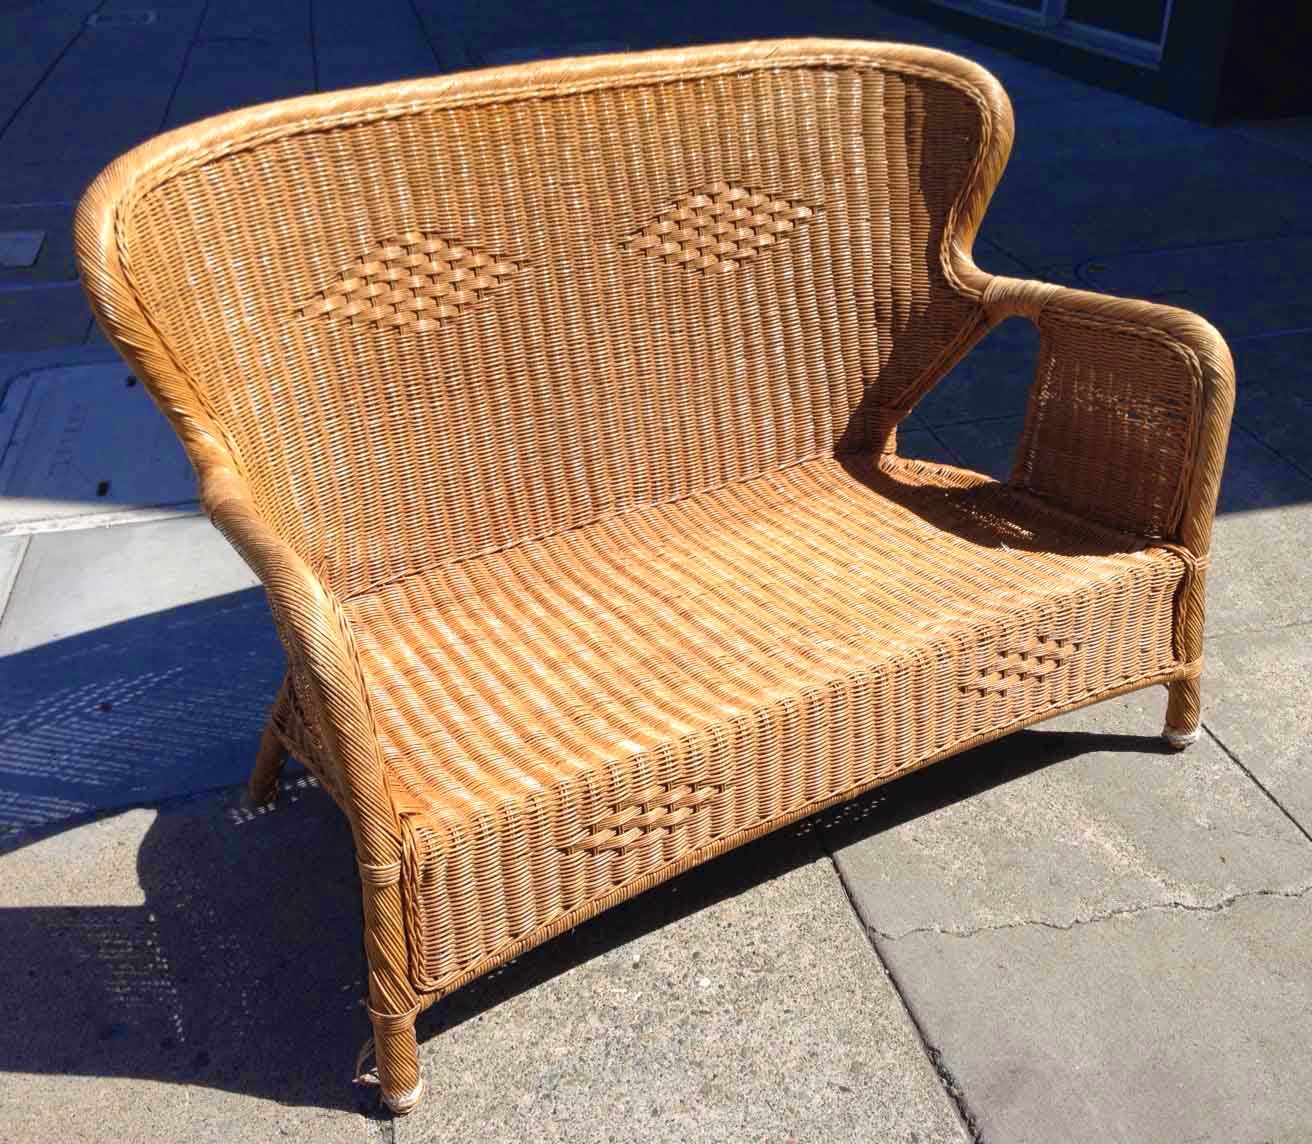 UHURU FURNITURE & COLLECTIBLES: SOLD Wicker Settee with Down Filled